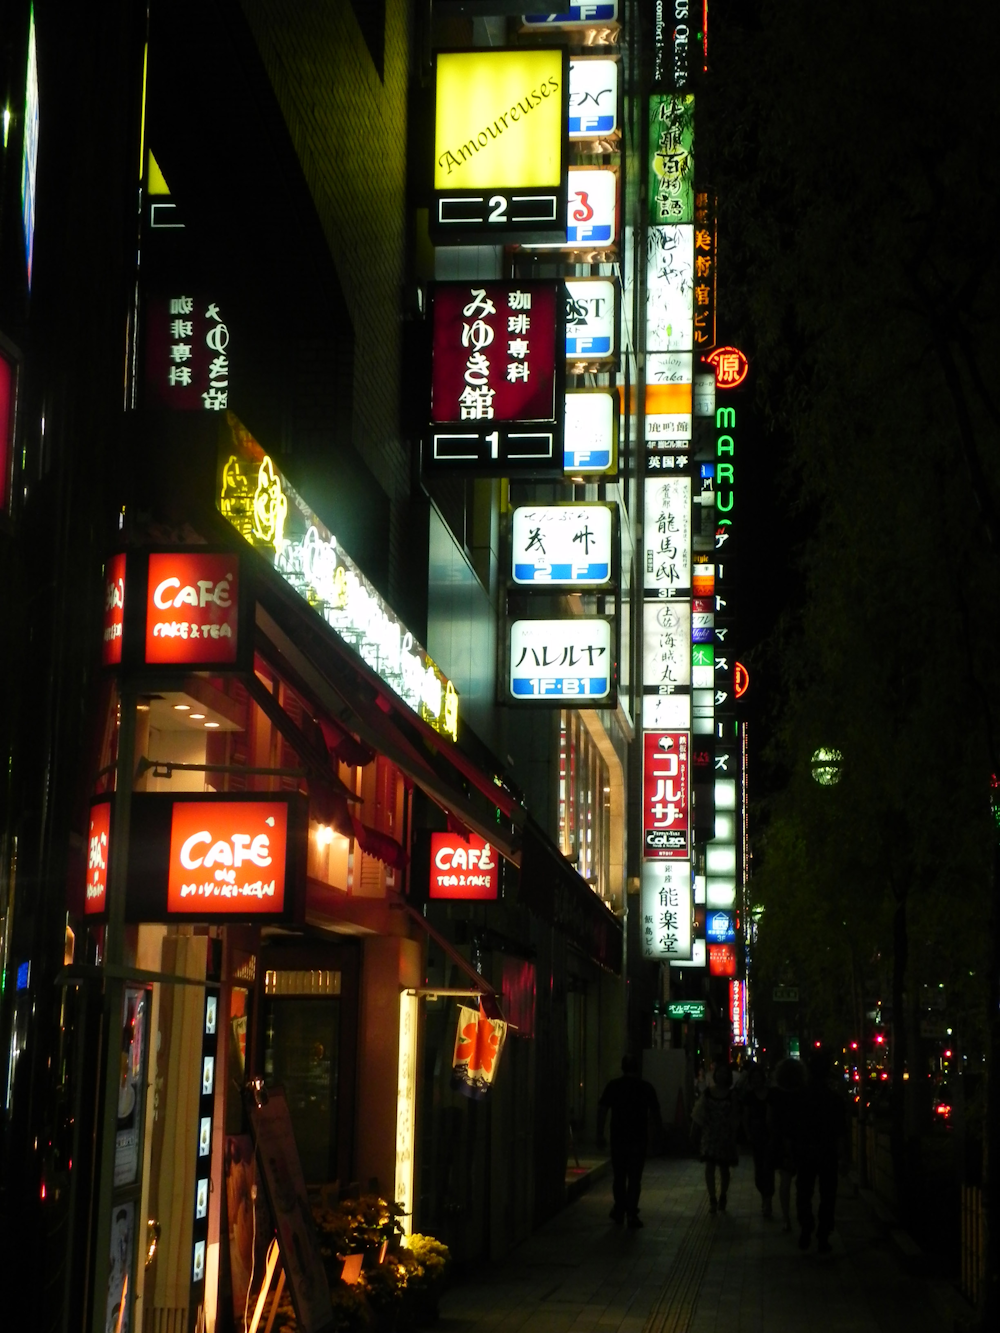 a city street at night with neon signs on the buildings